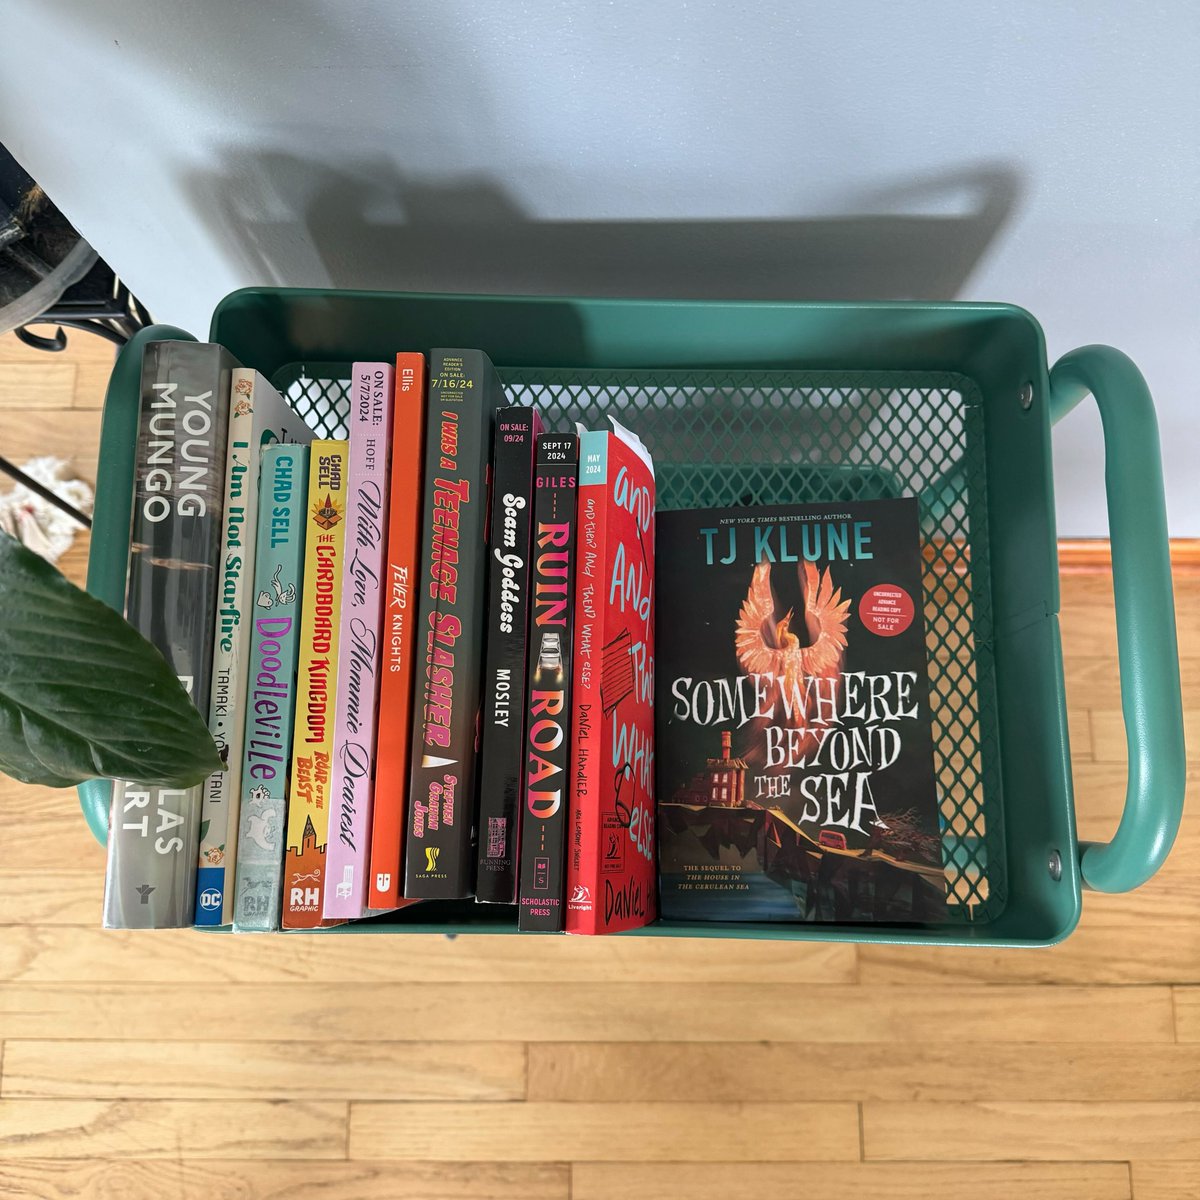 Joe's book cart TBR is looking 🔥 🔥 🔥 What's up next on your TBR list?